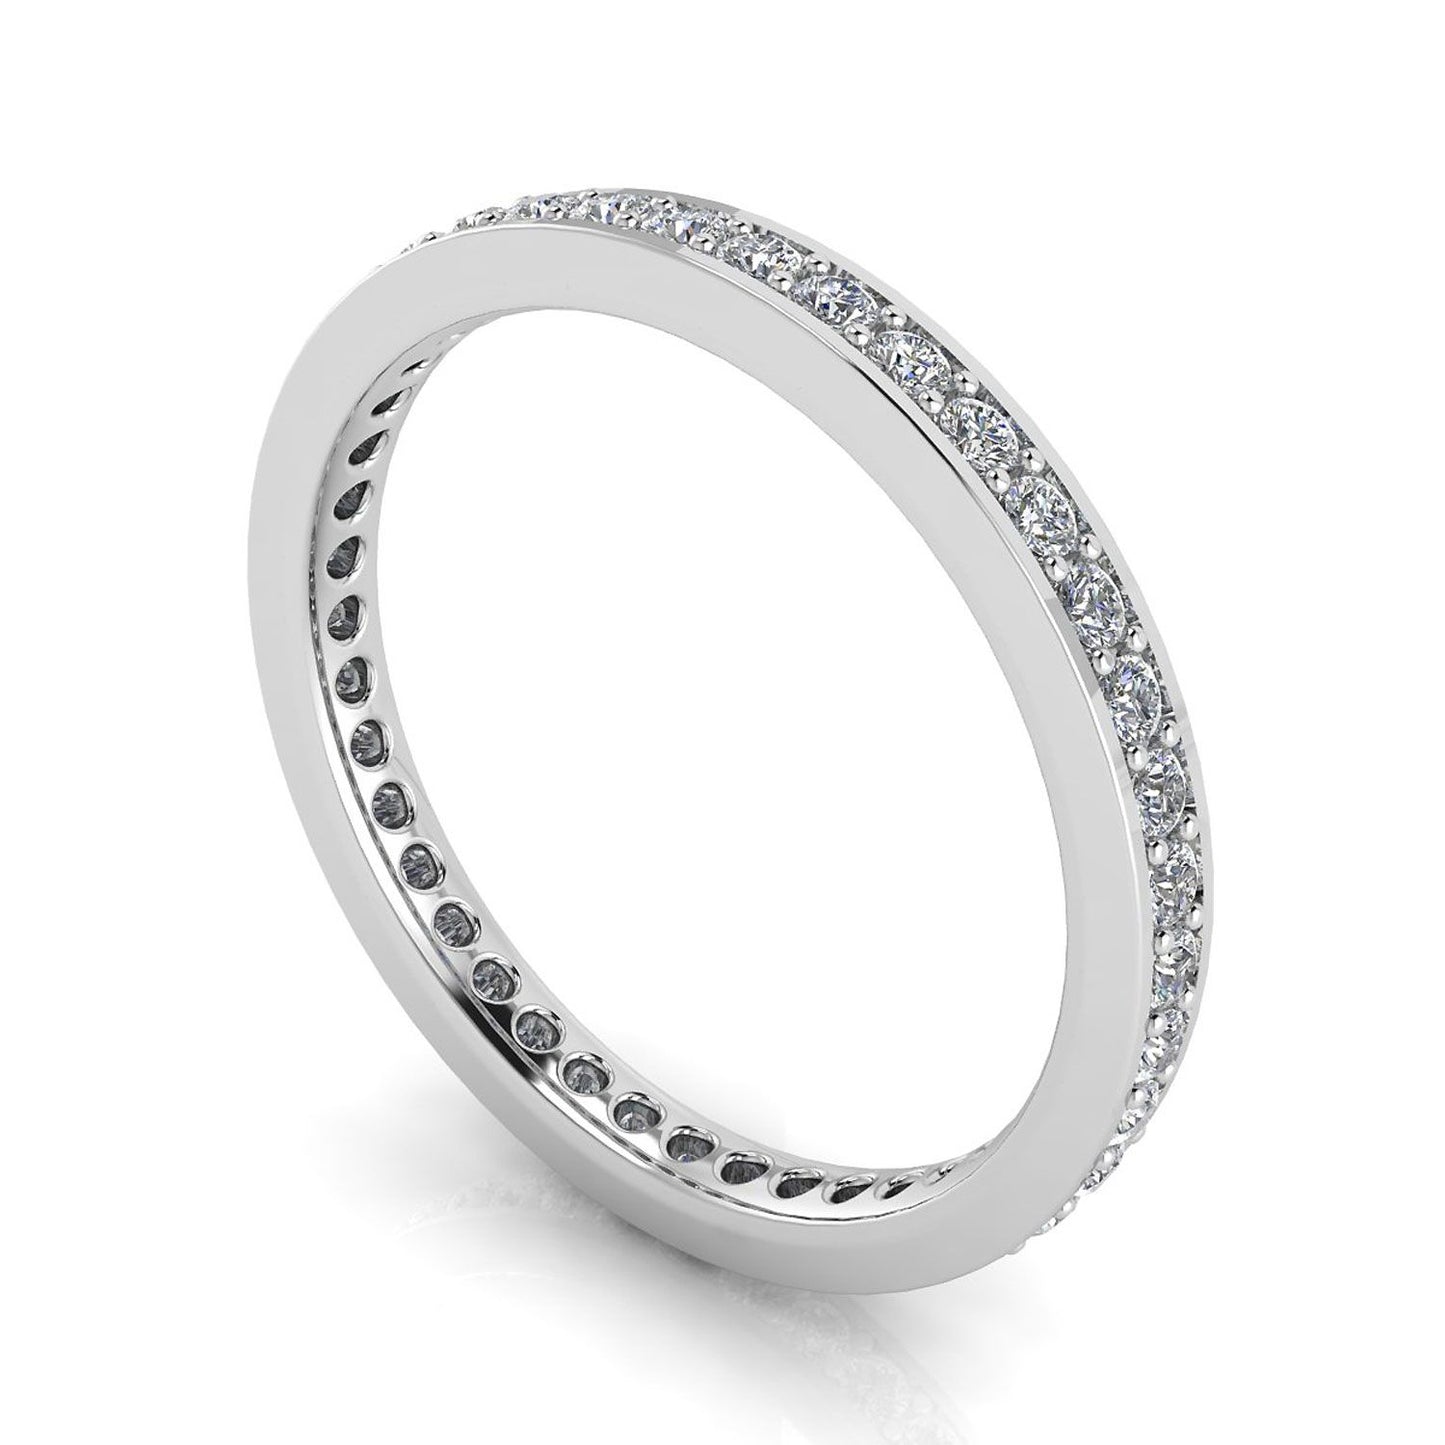 Round Brilliant Cut Diamond Channel Pave Set Eternity Ring In 18k White Gold  (0.34ct. Tw.) Ring Size 8